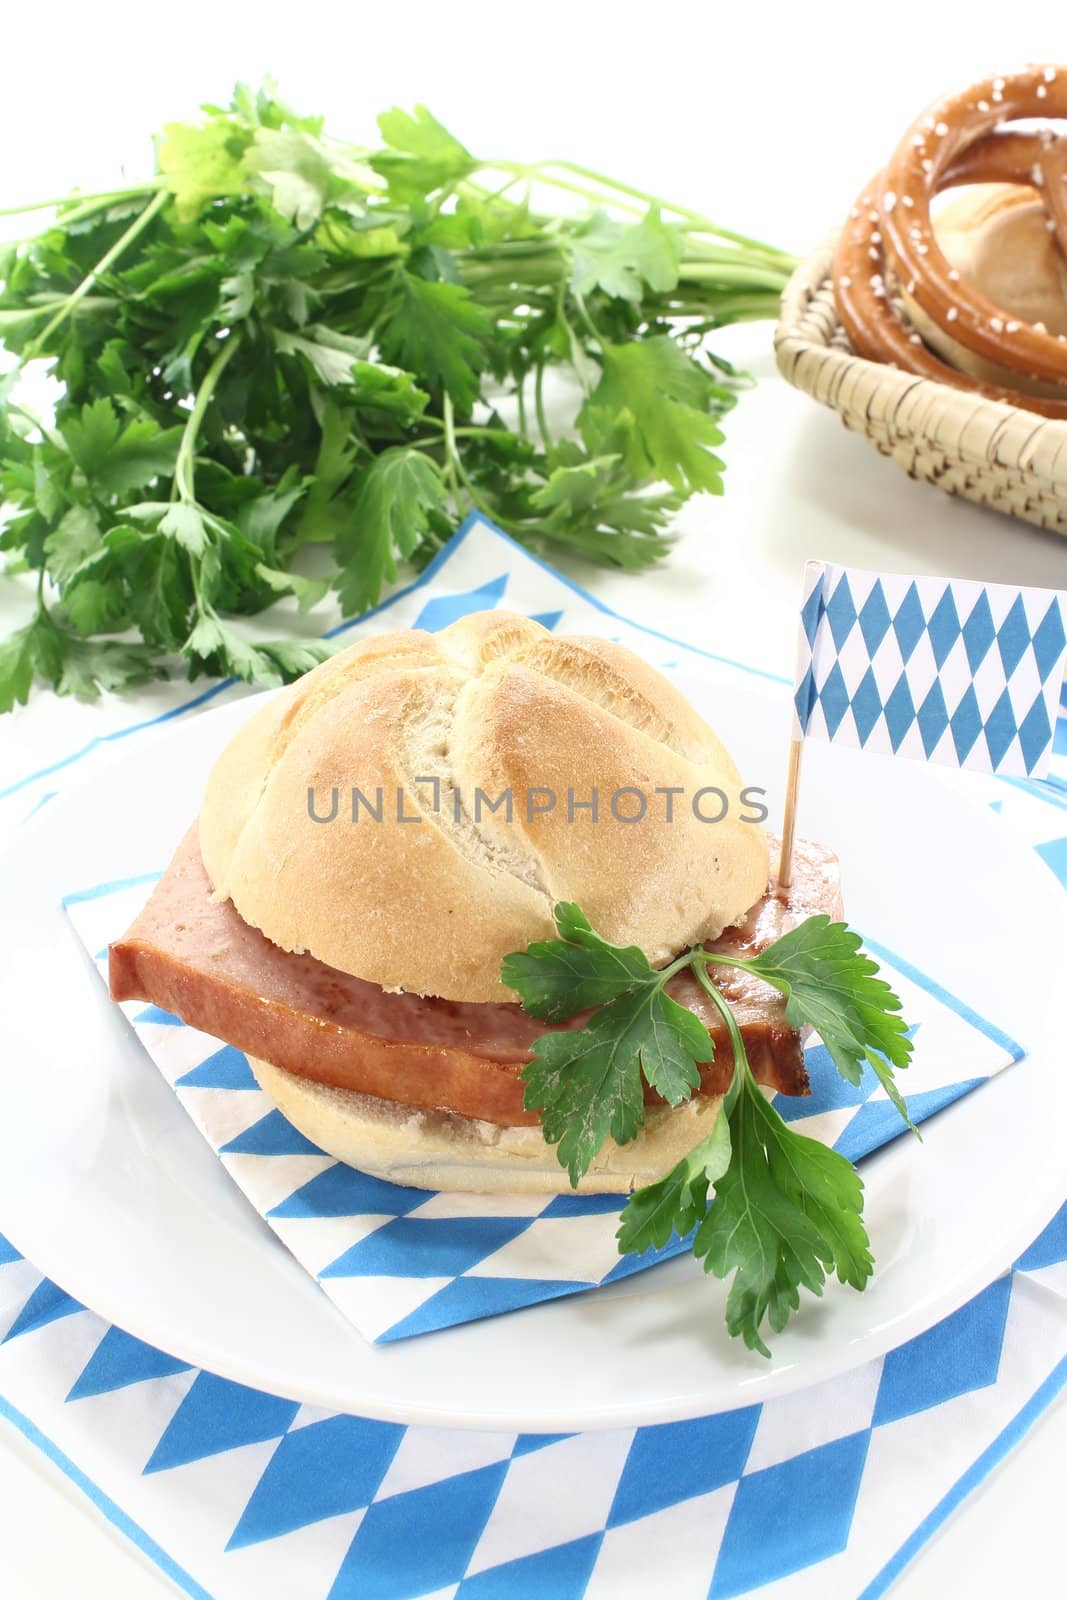 Roll with beef and pork loaf, mustard, parsley on a light background